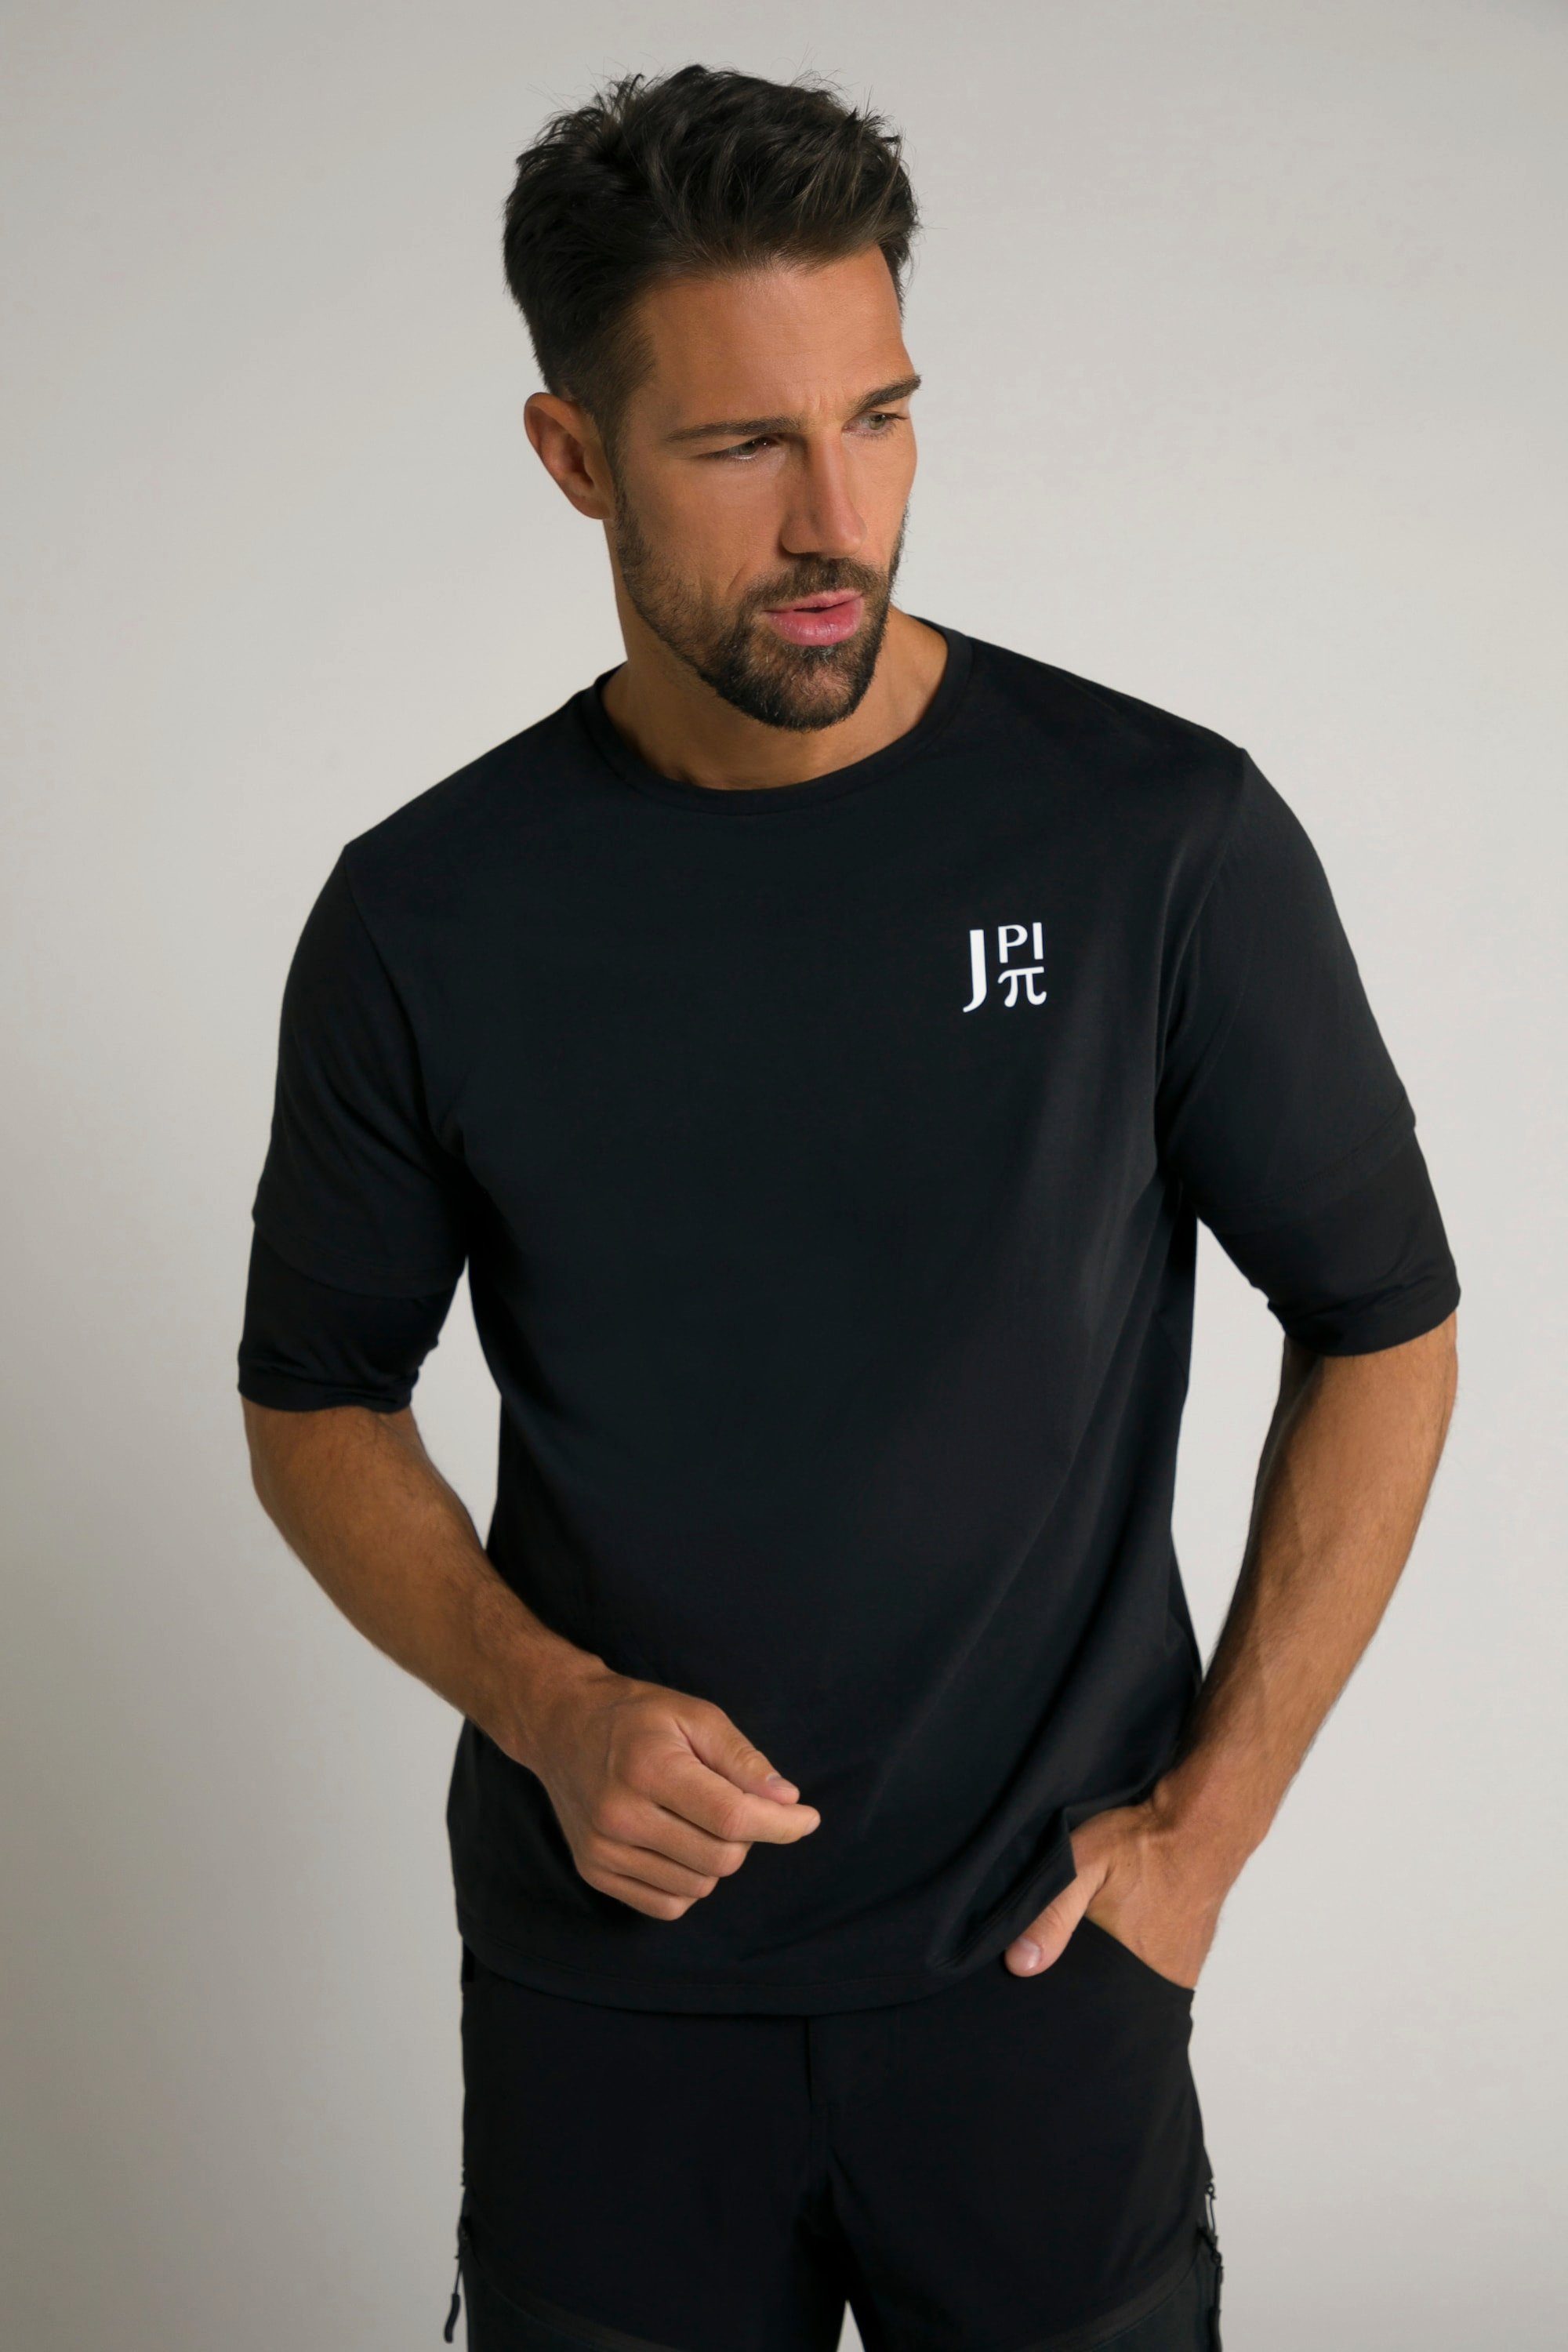 JP1880 T-Shirt Funktions-Shirt 2-in-1 Halbarm QuickDry